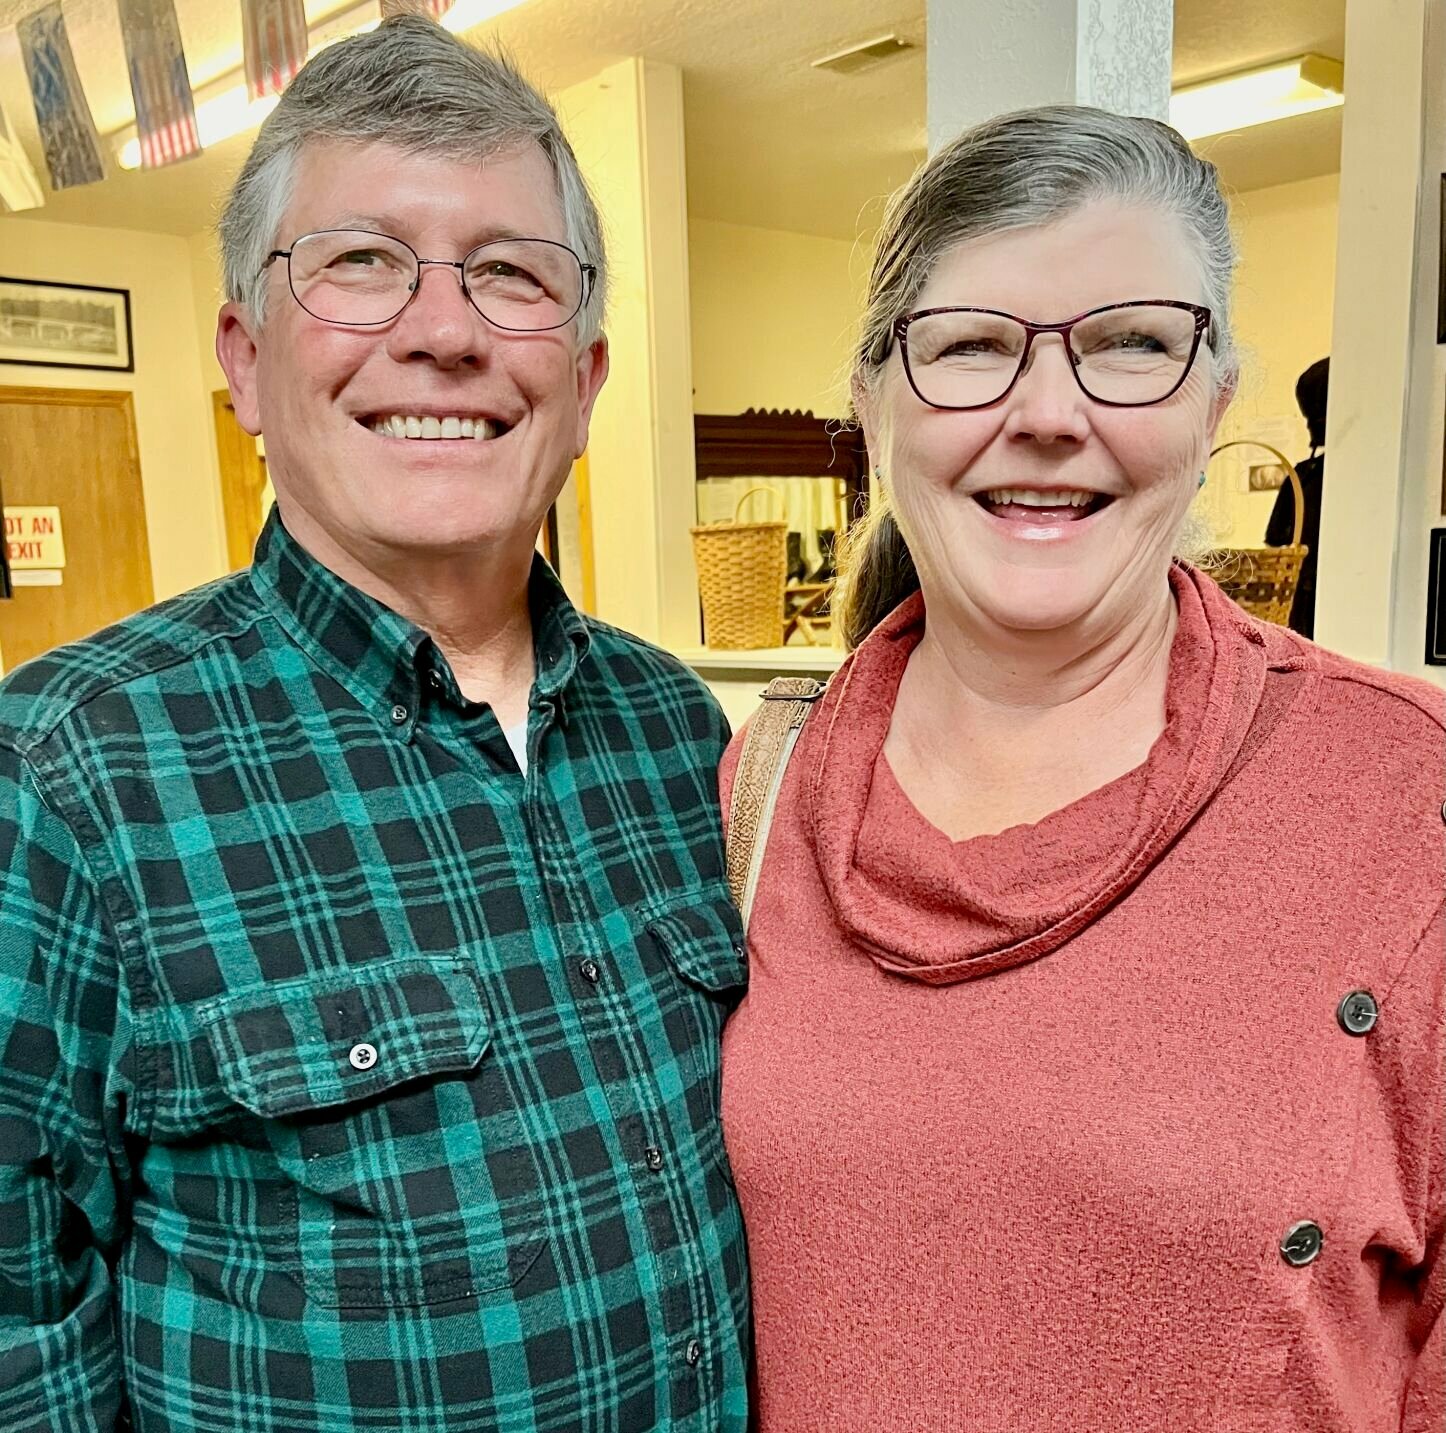 Ben Timson, left, and Ruth Maxwell recently presented a history program on the village of Cedar Grove, now extinct, that was located on the upper Current River.